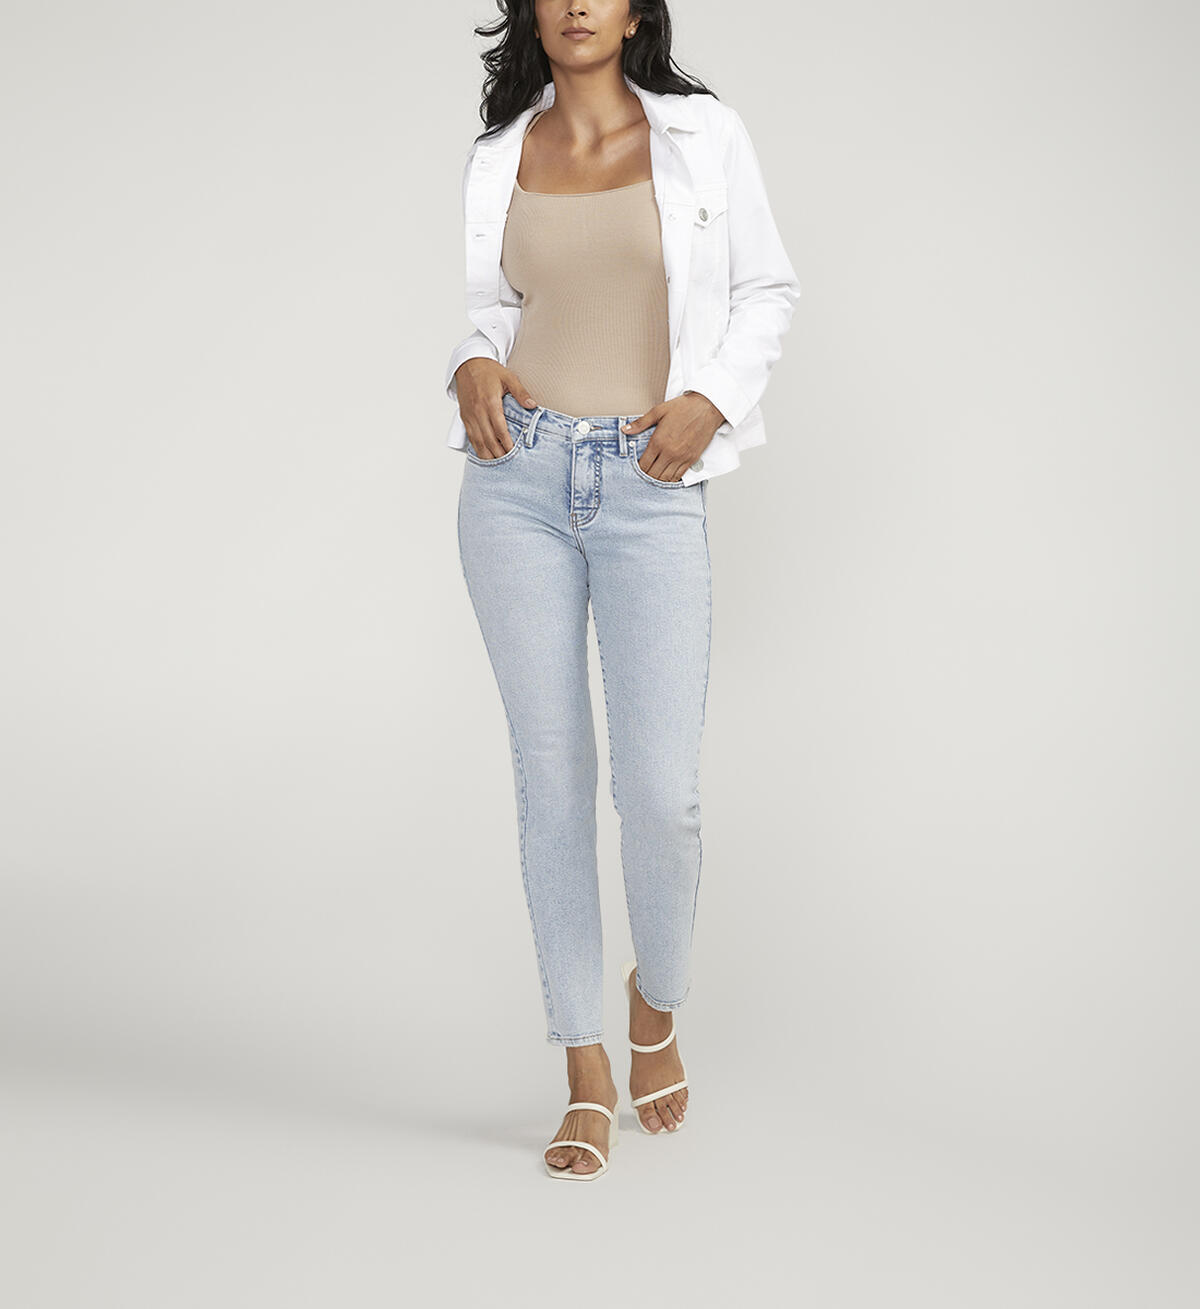 Cassie Mid Rise Straight Leg Jeans, Bali Blue, hi-res image number 0